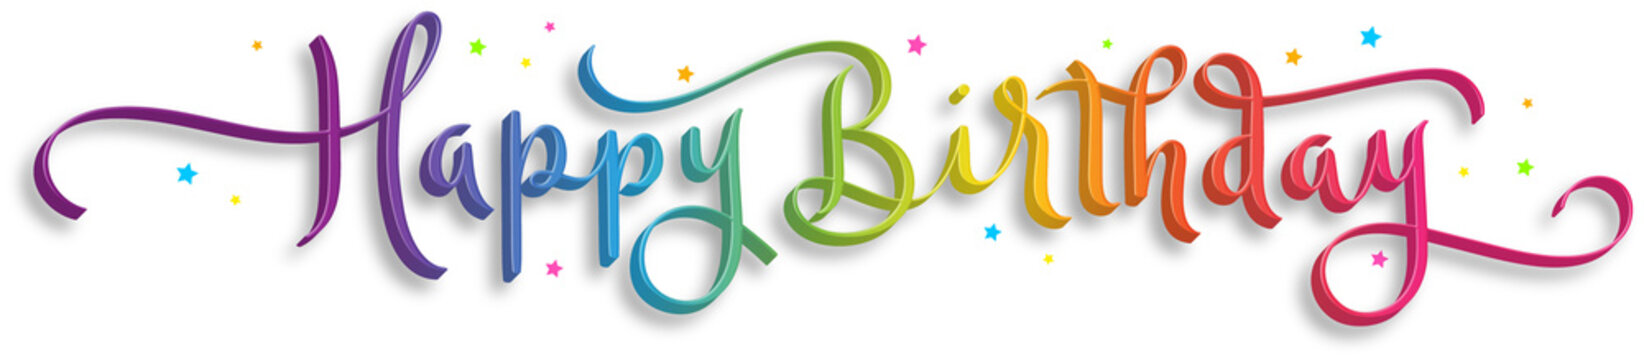 HAPPY BIRTHDAY rainbow-colored 3D brush calligraphy banner with stars on transparent background